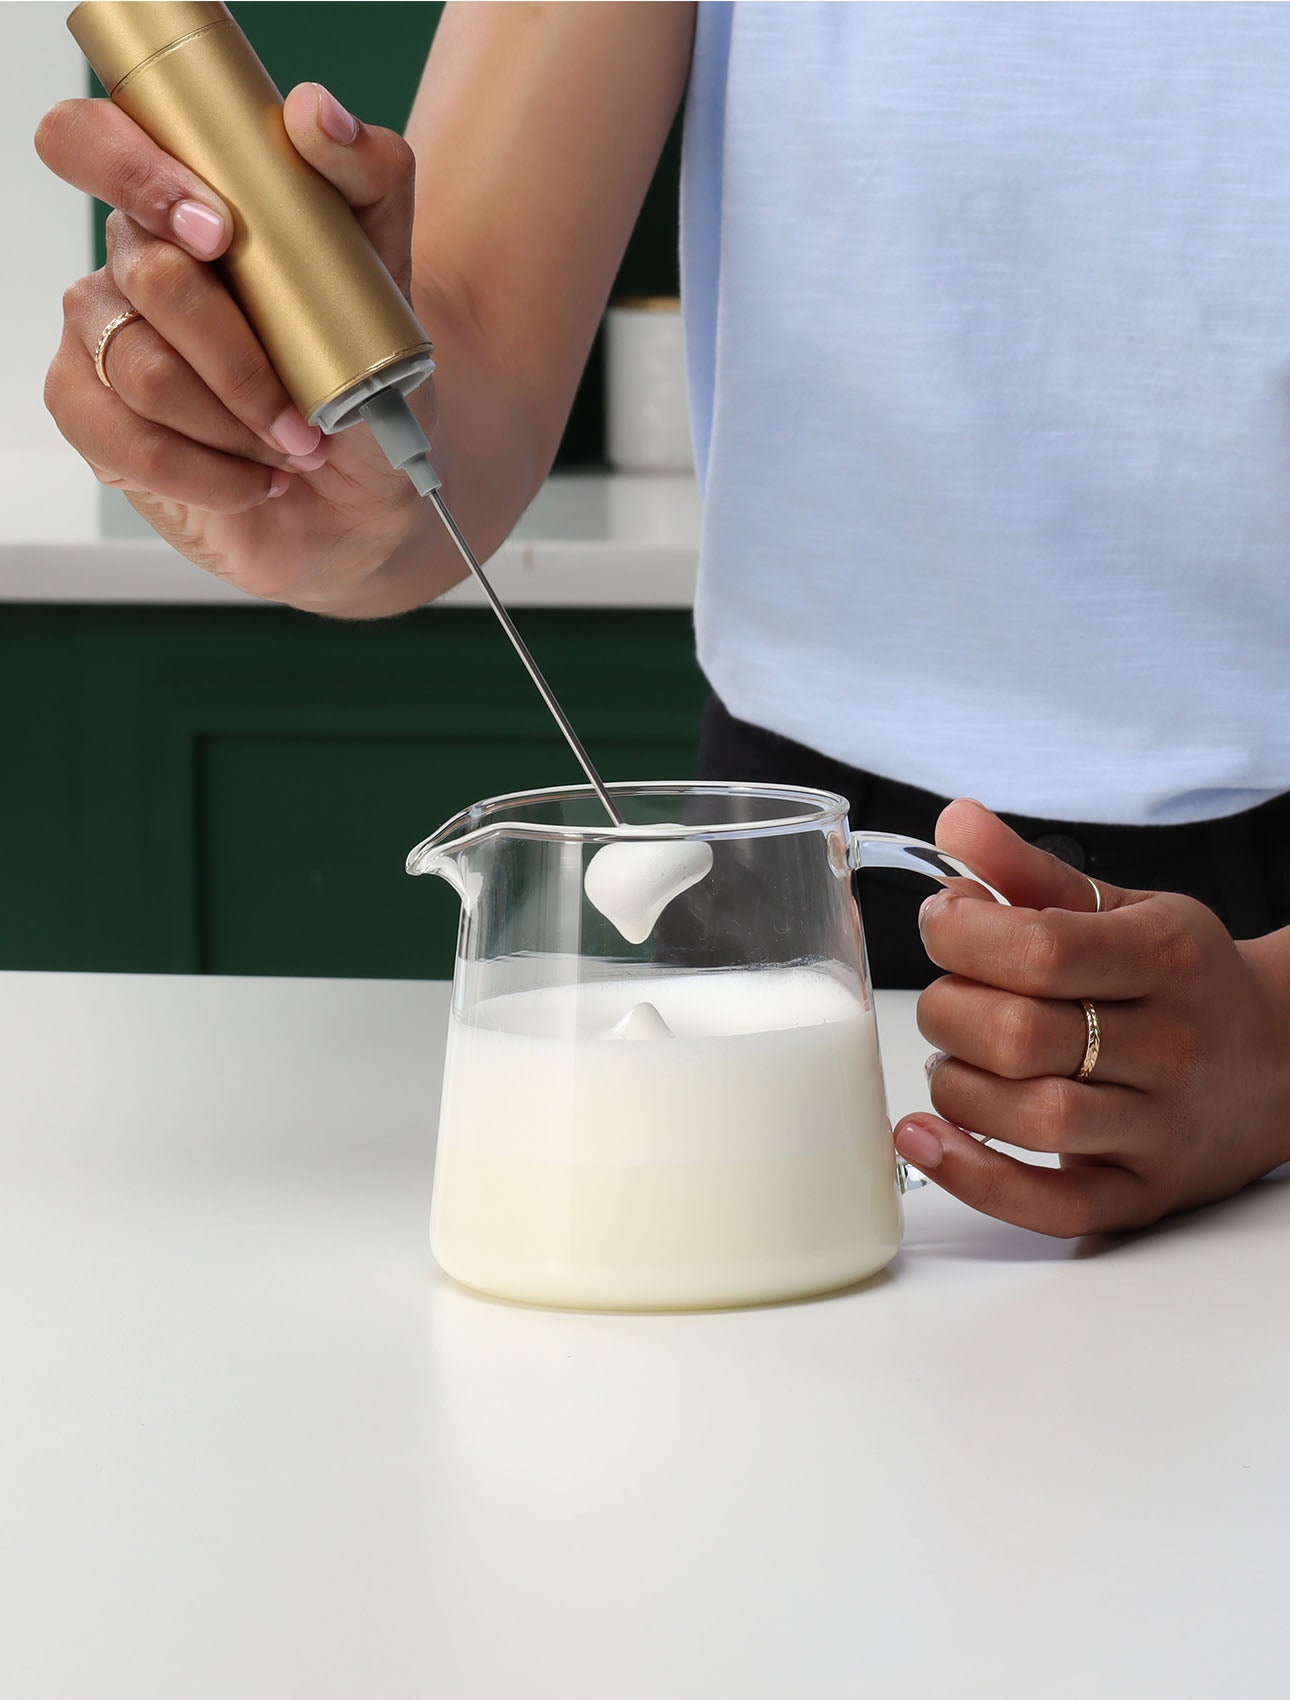 How to froth milk with an electric mixer